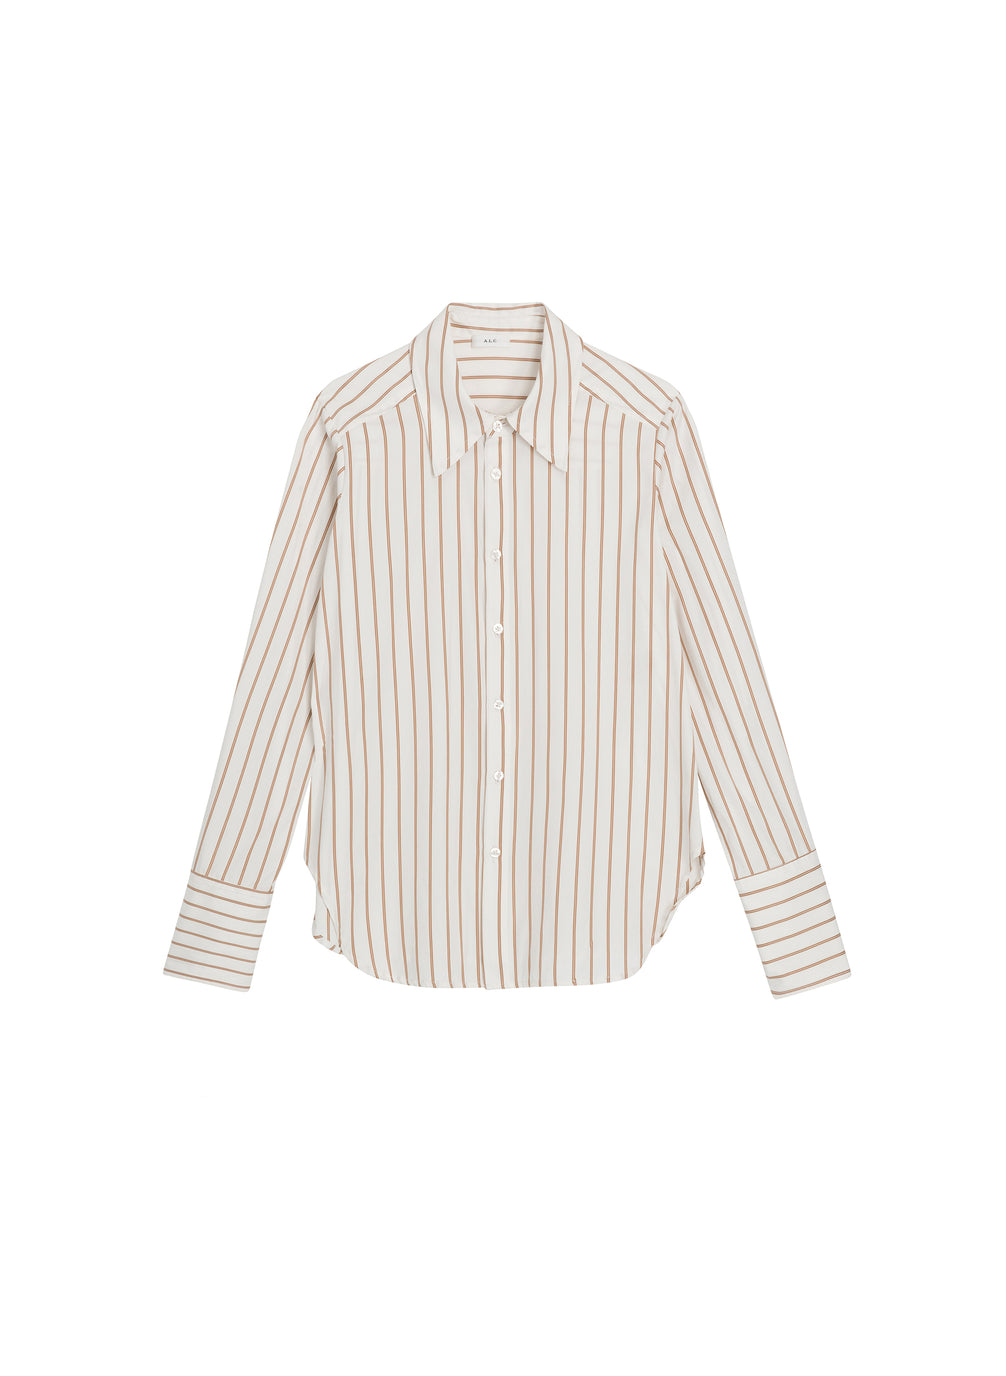 flatlay of brown and white striped shirt